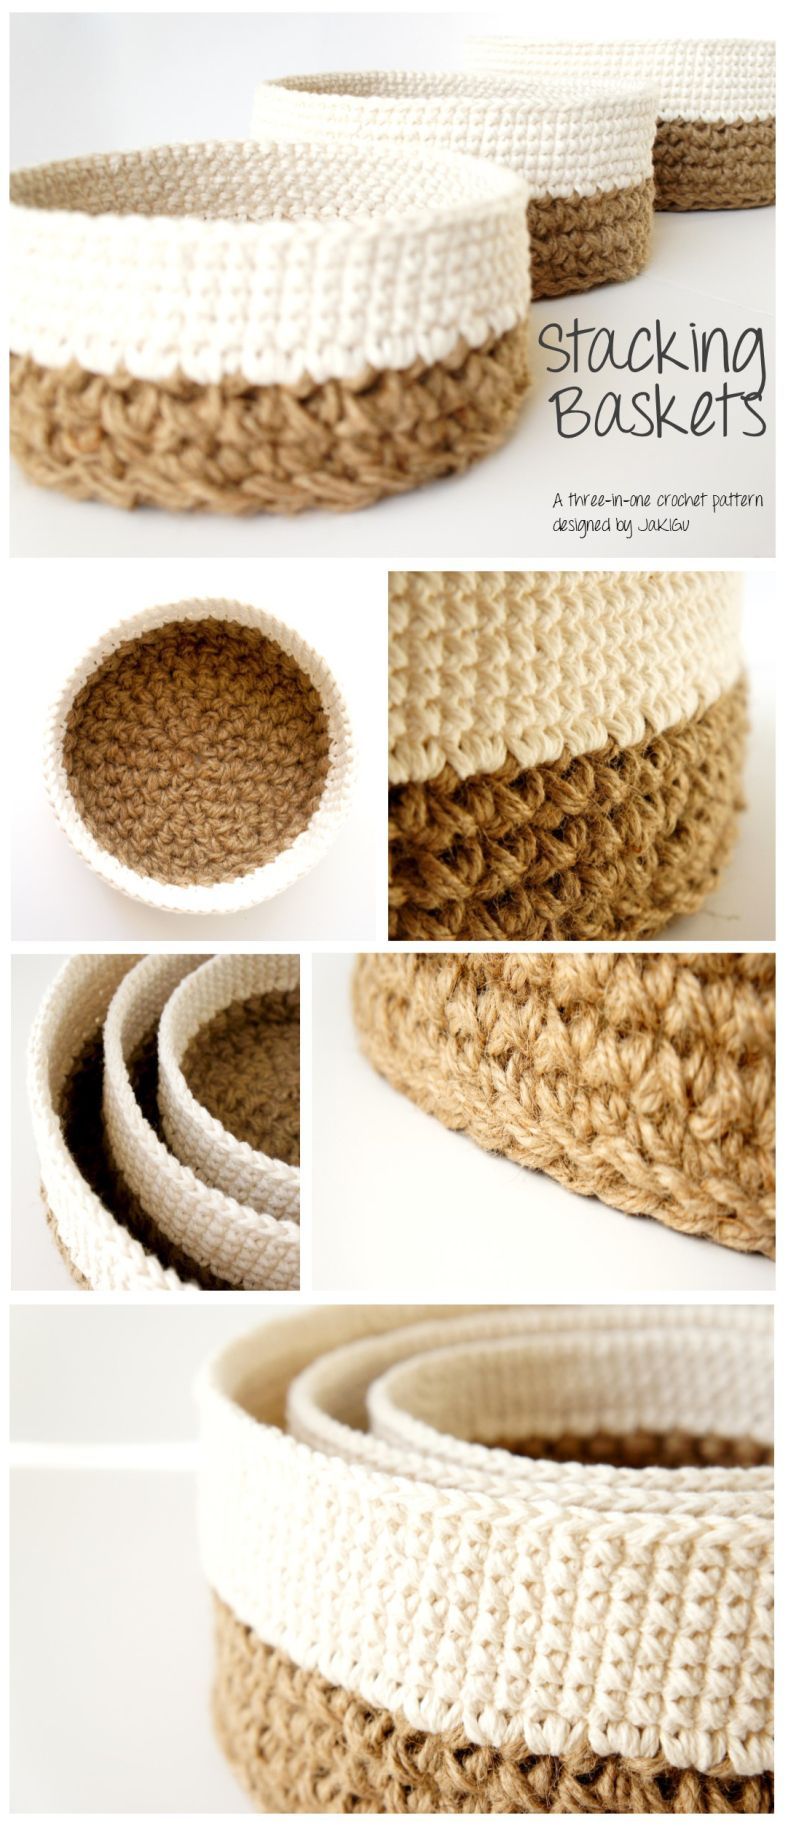 Stacking Baskets Crochet Pattern by JaKiGu – Three nesting baskets worked in jute and cotton